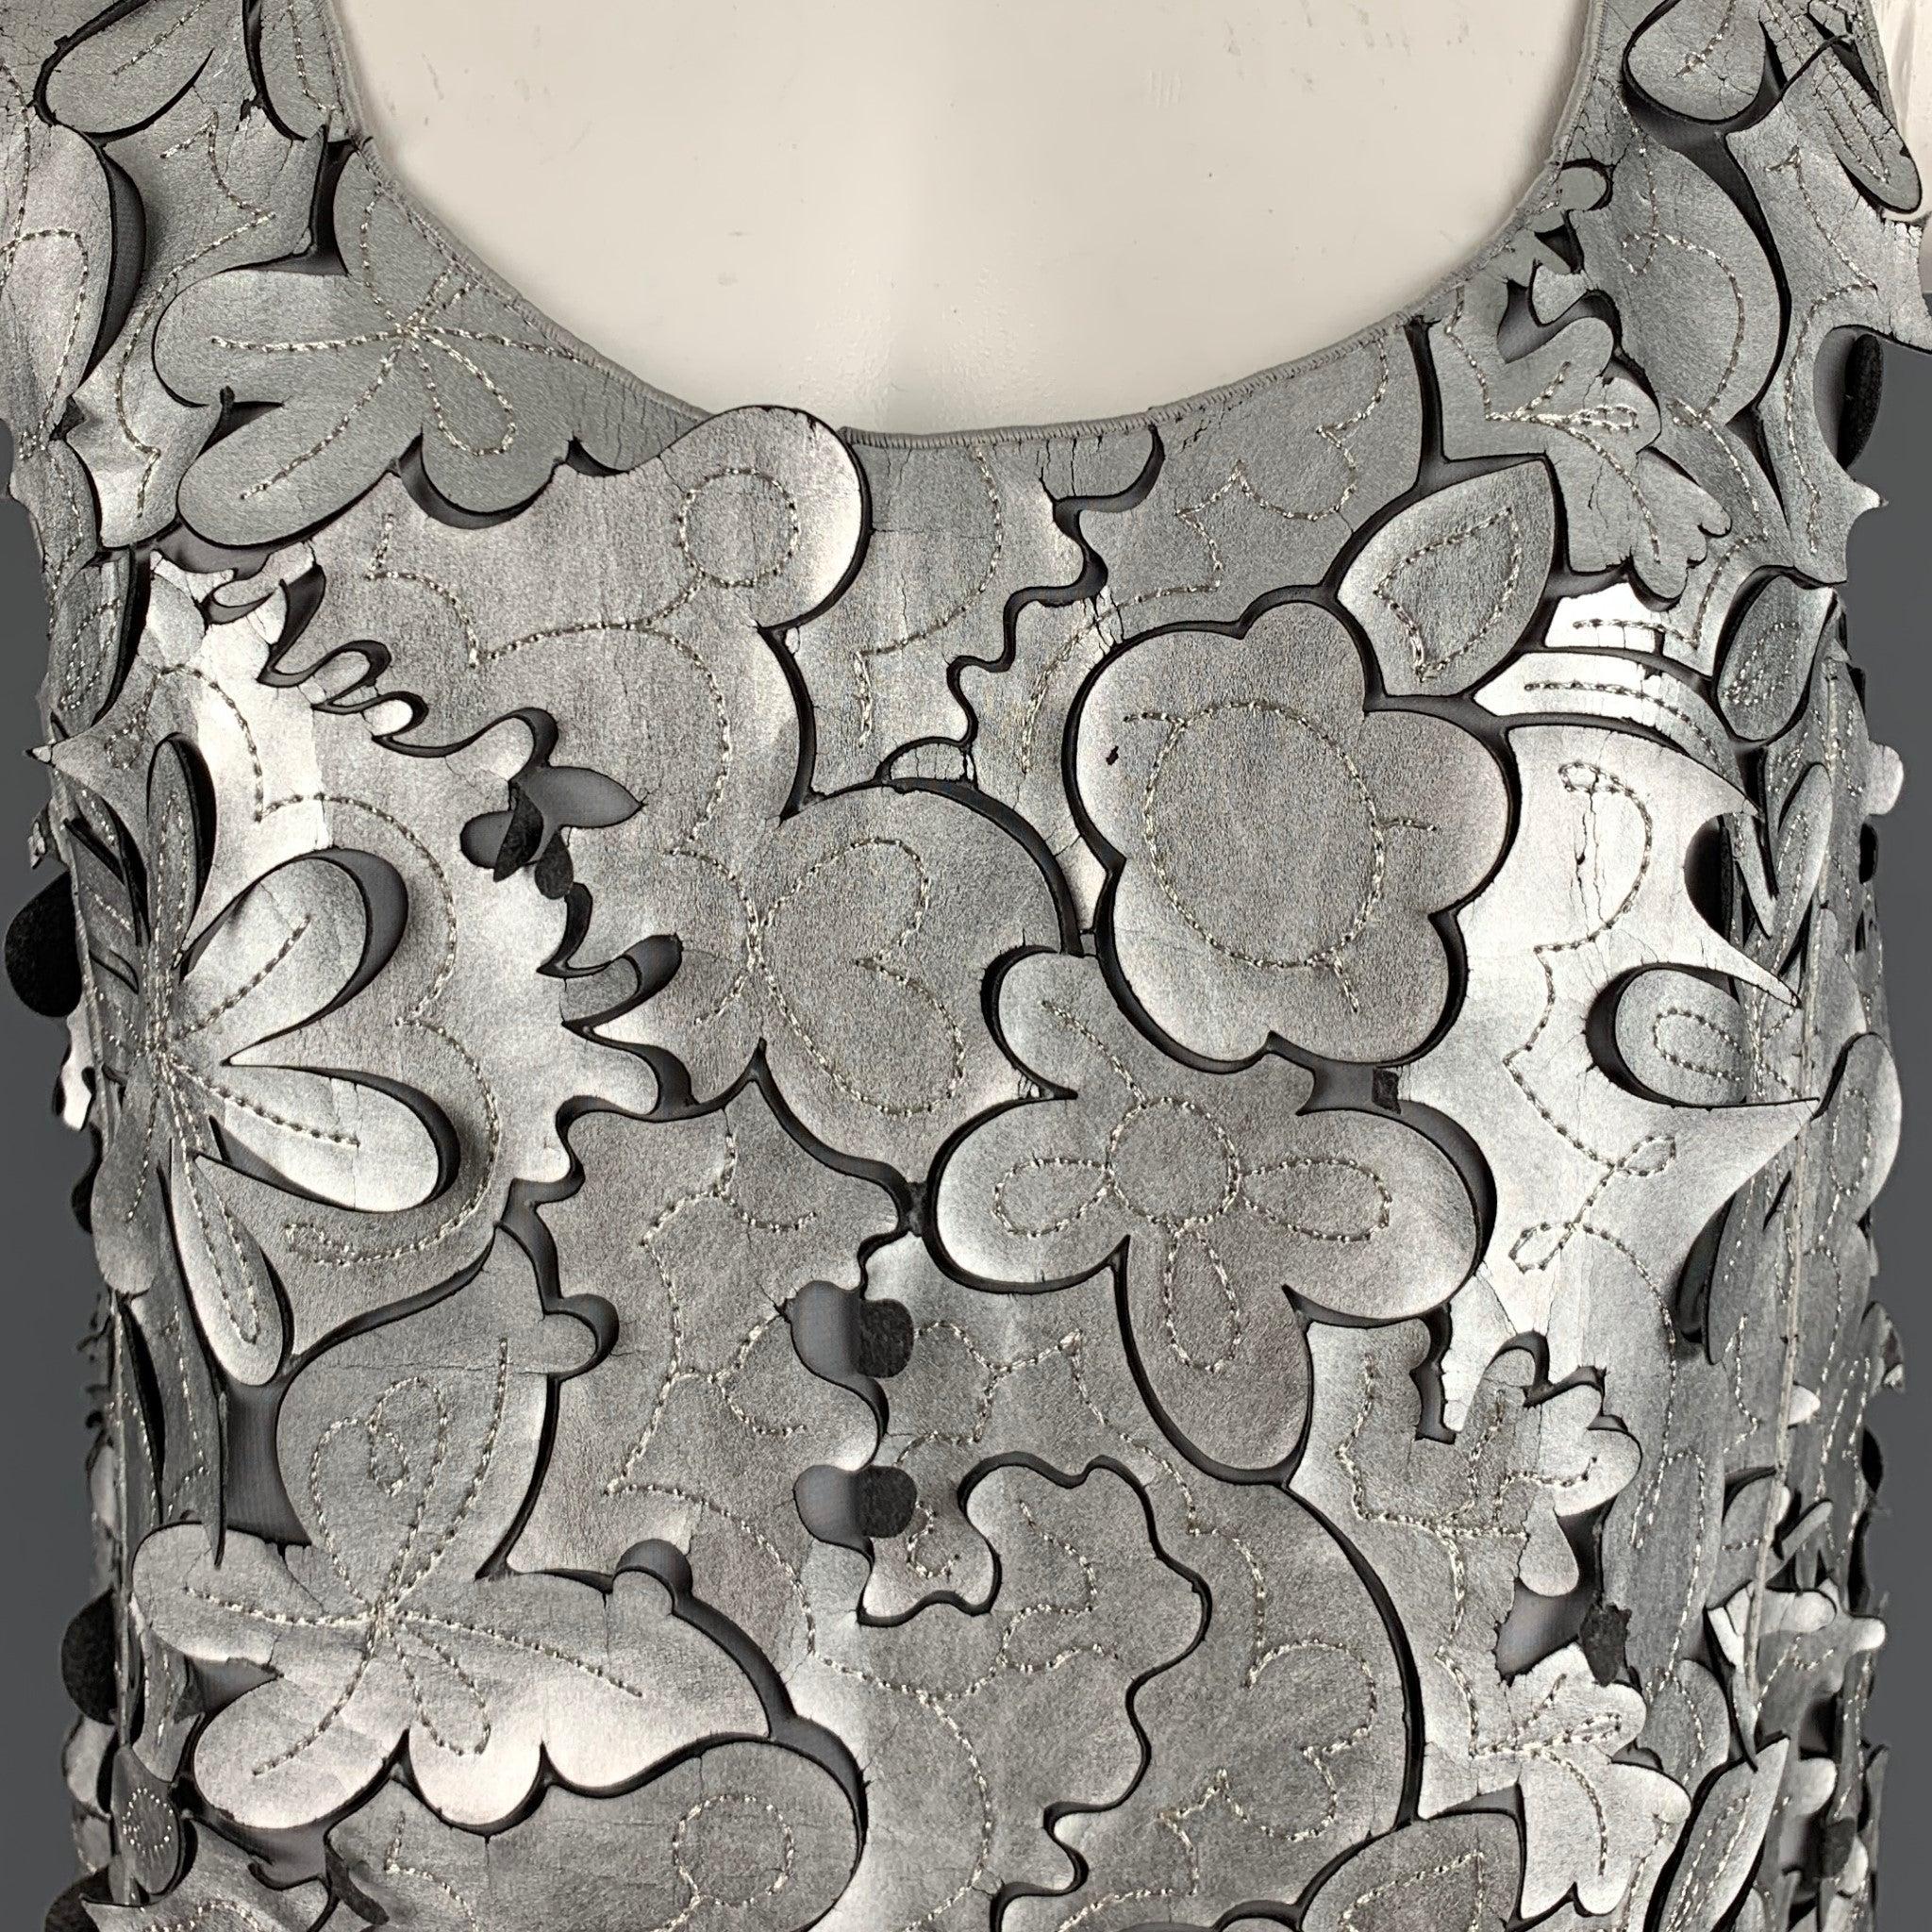 MARC JACOBS dress top
in a silver grey leather fabric featuring laser cut floral design, sleeveless style, and back zipper closure.Good Pre-Owned Condition. Moderate signs of wear. 

Marked:  0 

Measurements: 
 
Shoulder: 12.5 inches Bust: 34